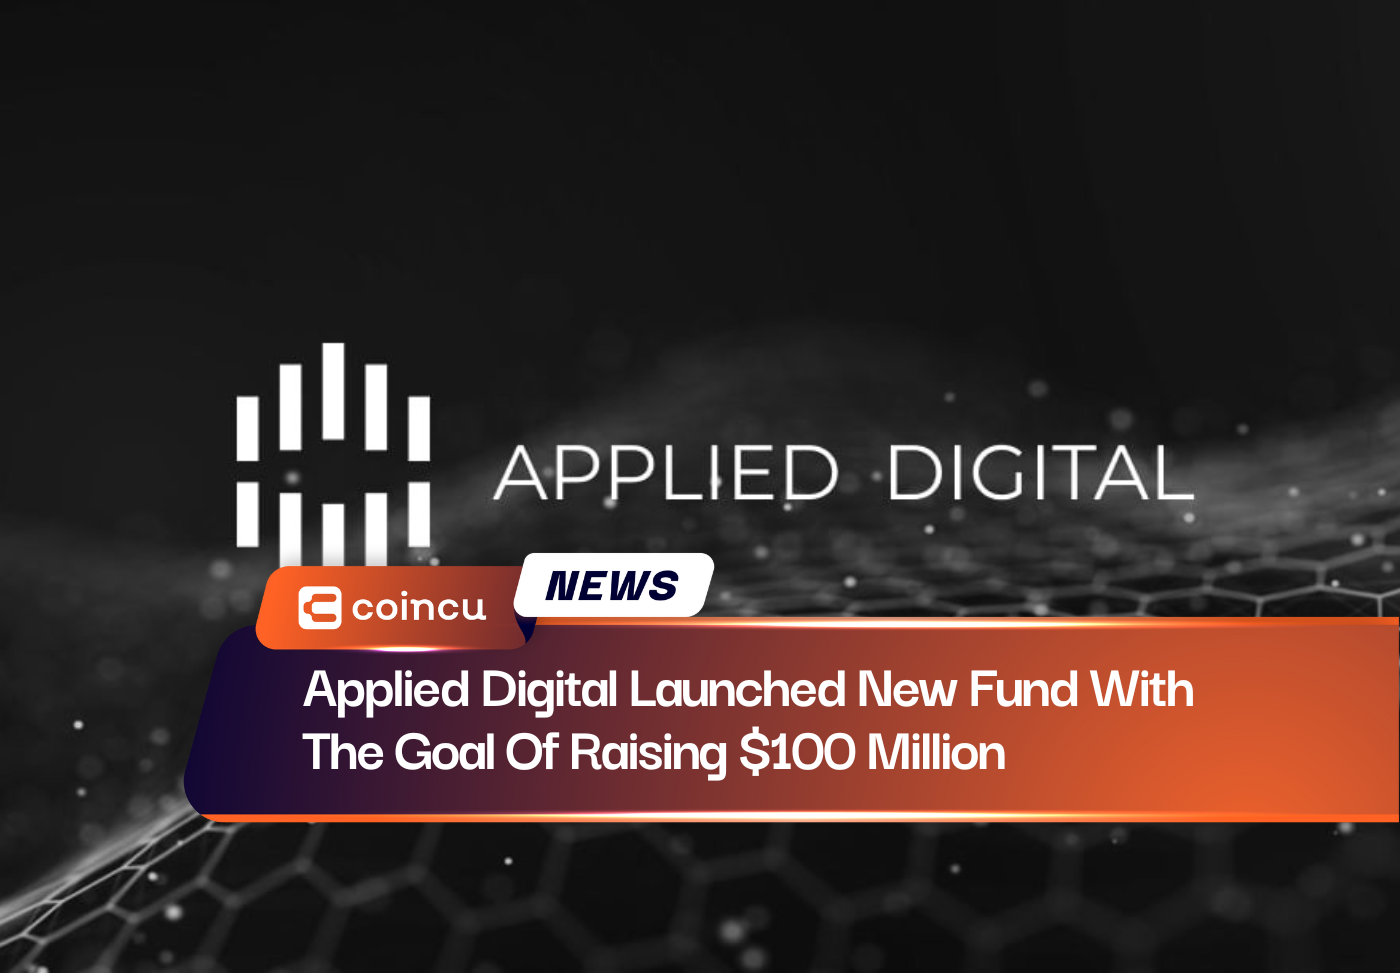 Applied Digital Launched New Fund With The Goal Of Raising $100 Million